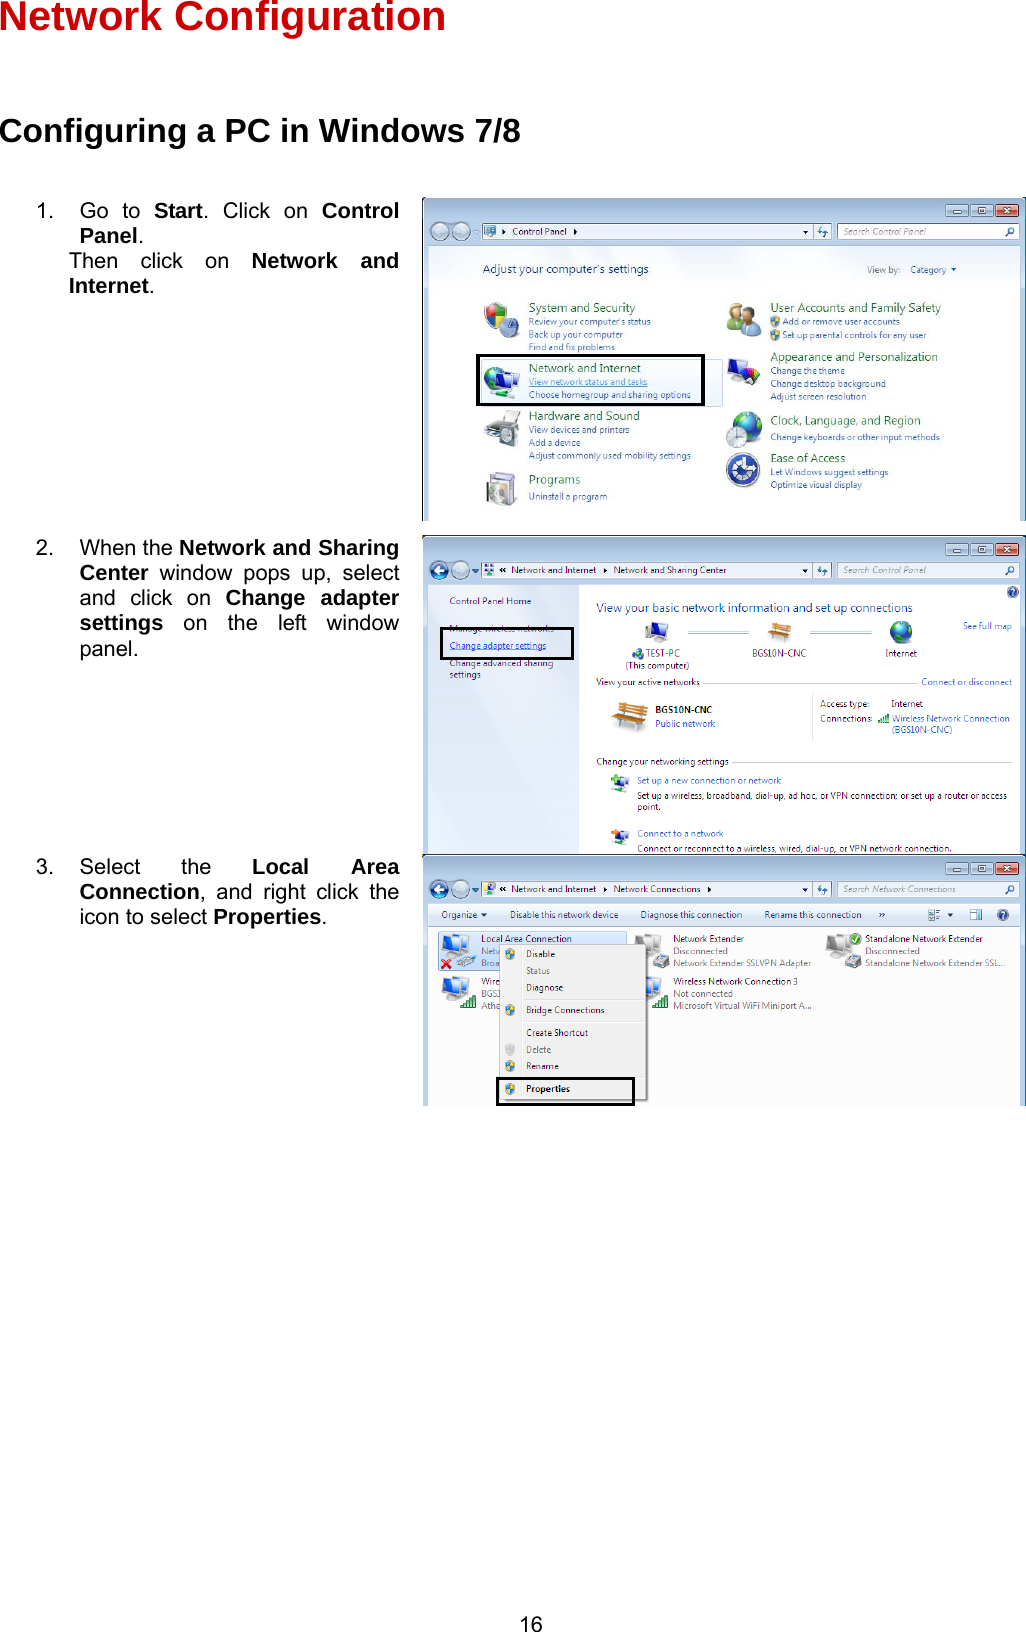  16 Network Configuration  Configuring a PC in Windows 7/8                     1. Go to Start. Click on Control Panel. Then click on Network and Internet. 2. When the Network and Sharing Center window pops up, select and click on Change adapter settings on the left window panel. 3. Select  the  Local Area Connection, and right click the icon to select Properties. 